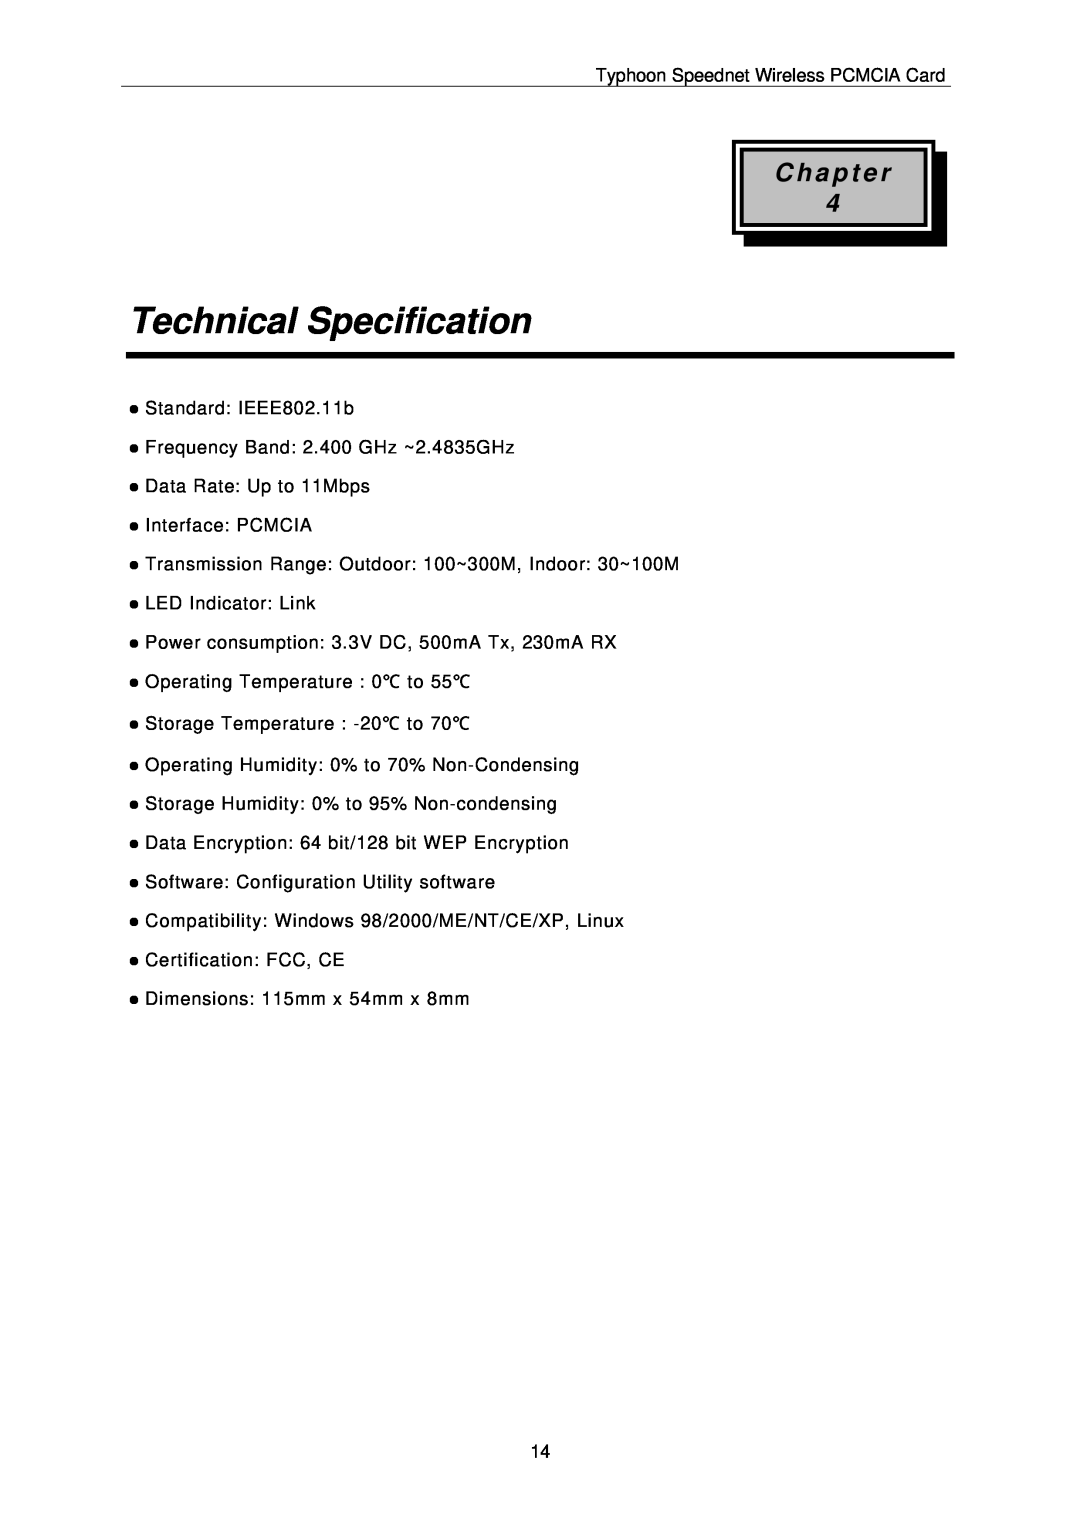 ANUBIS SPEEDNET WIRELESS PCMCIA CARD instruction manual Technical Specification, C h a p t e r 